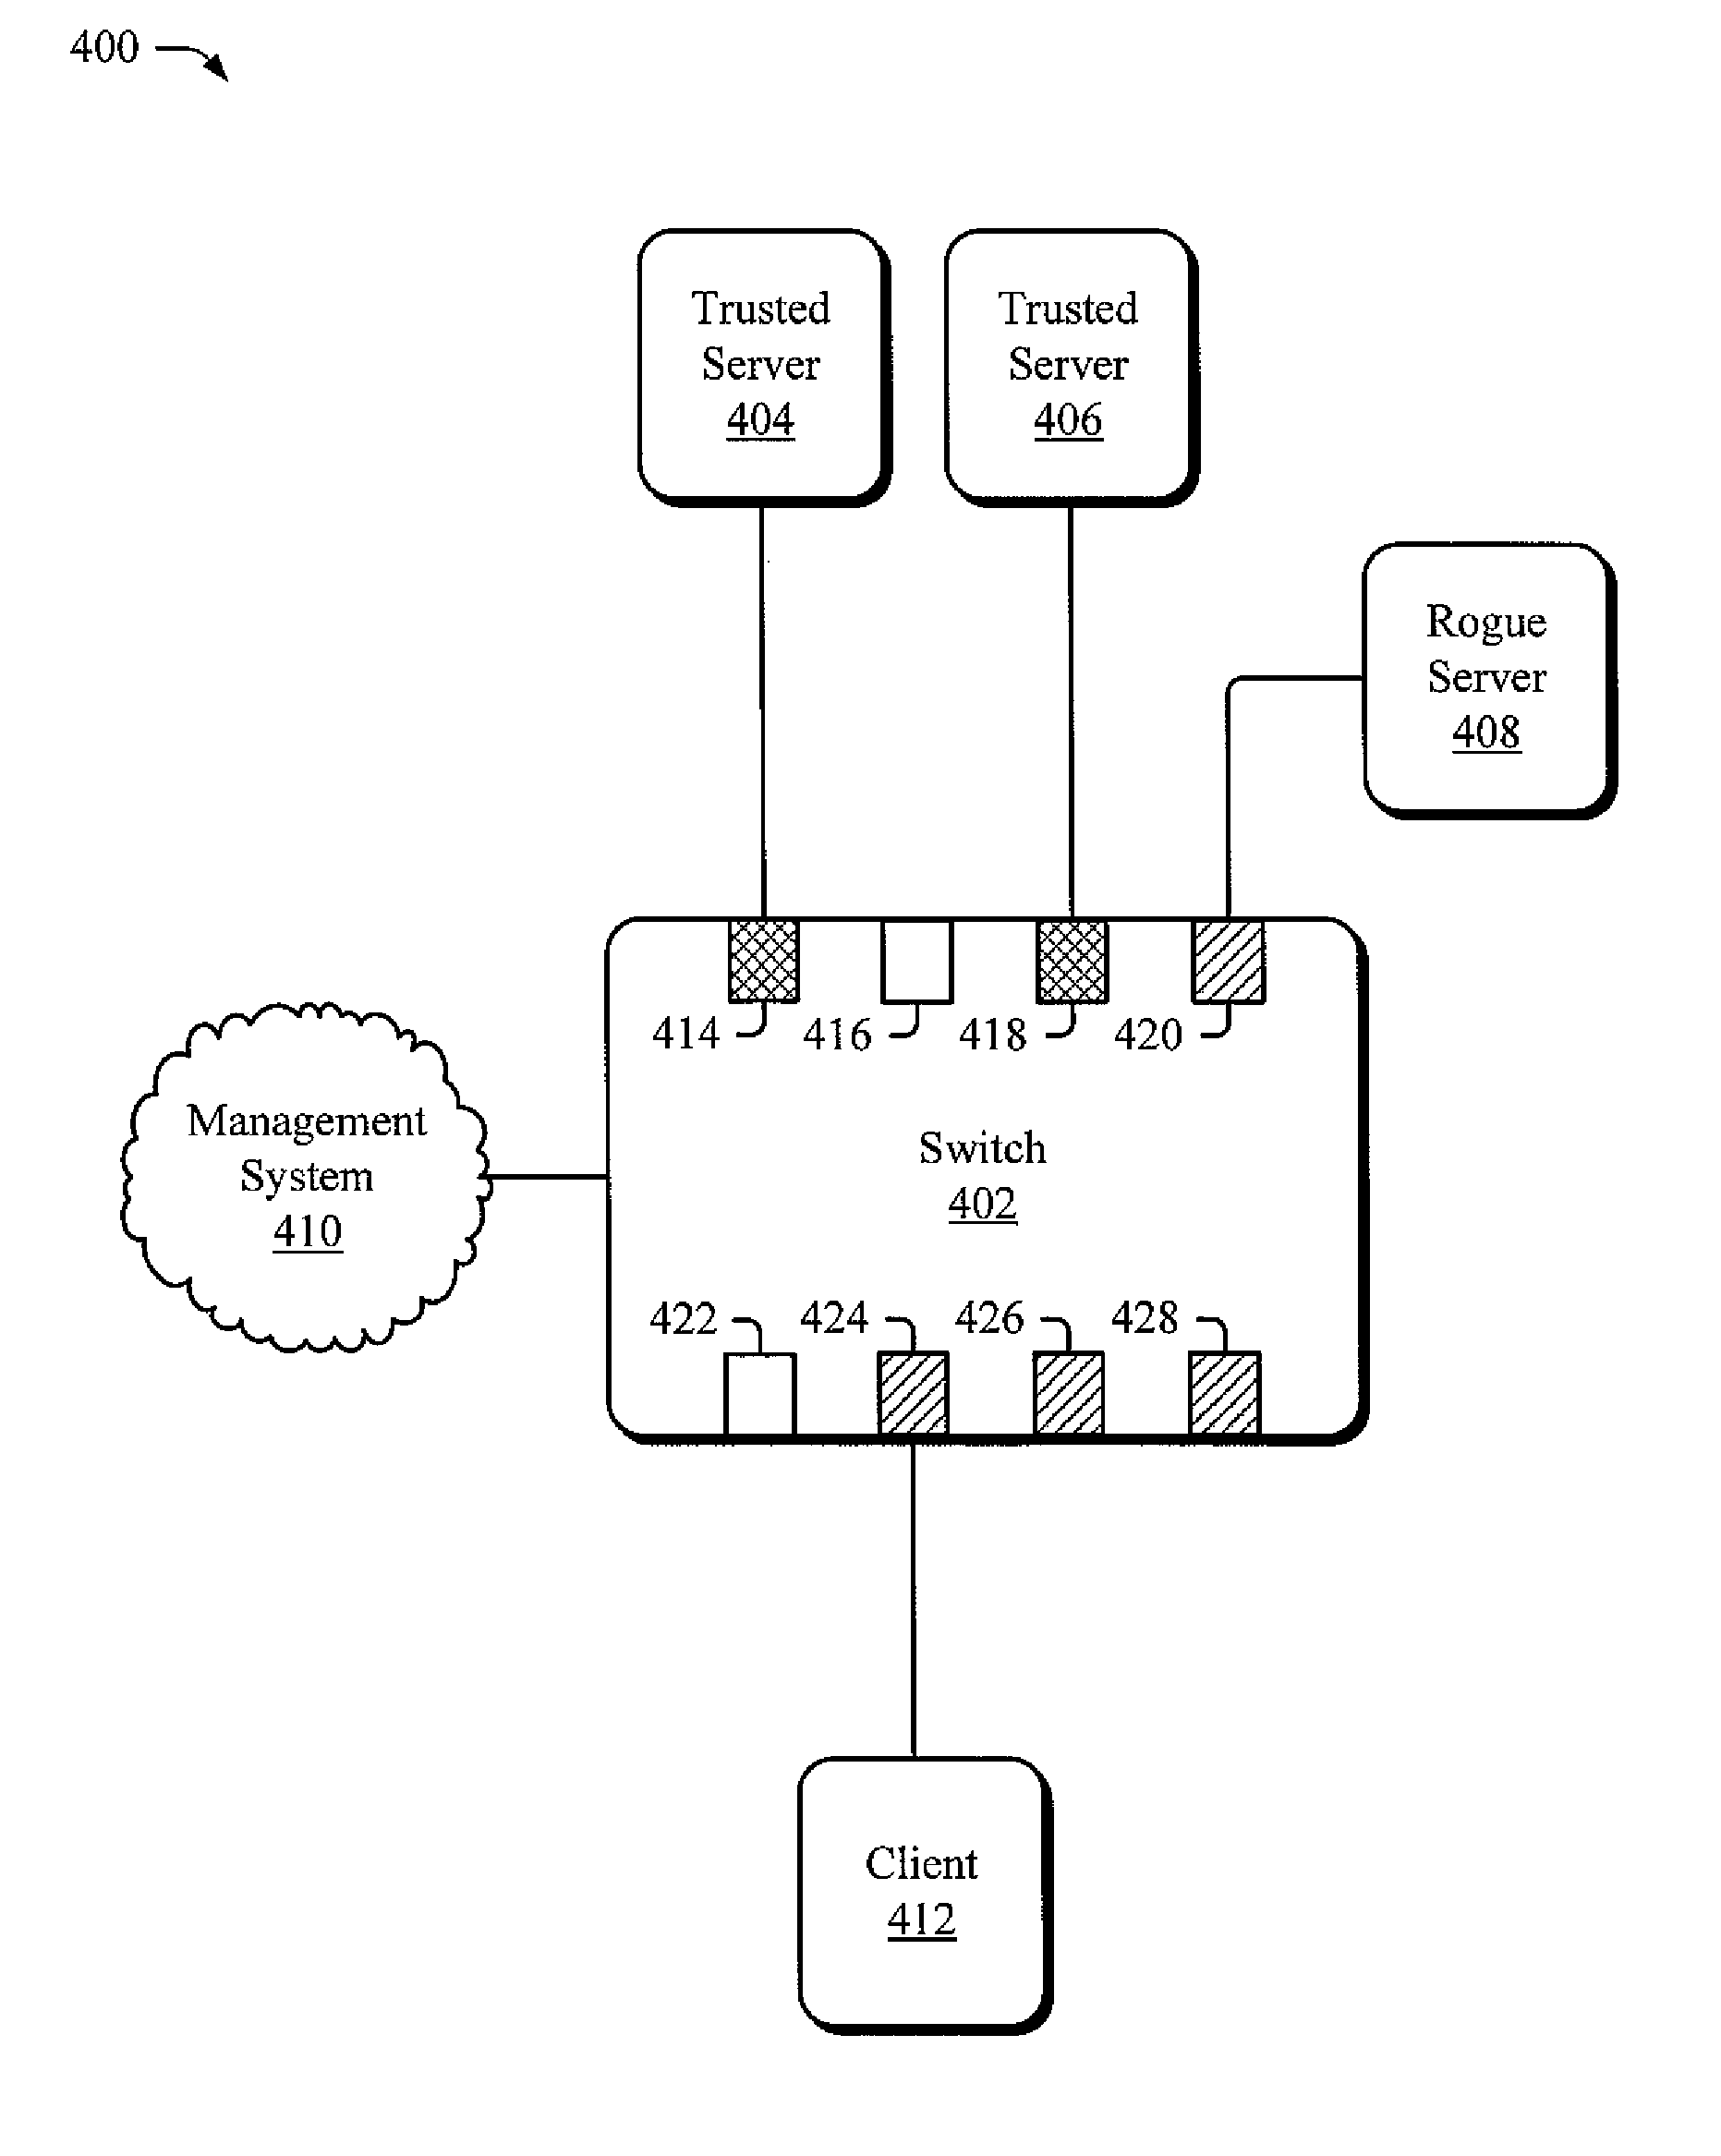 Limiting data packet forwarding to trusted ports